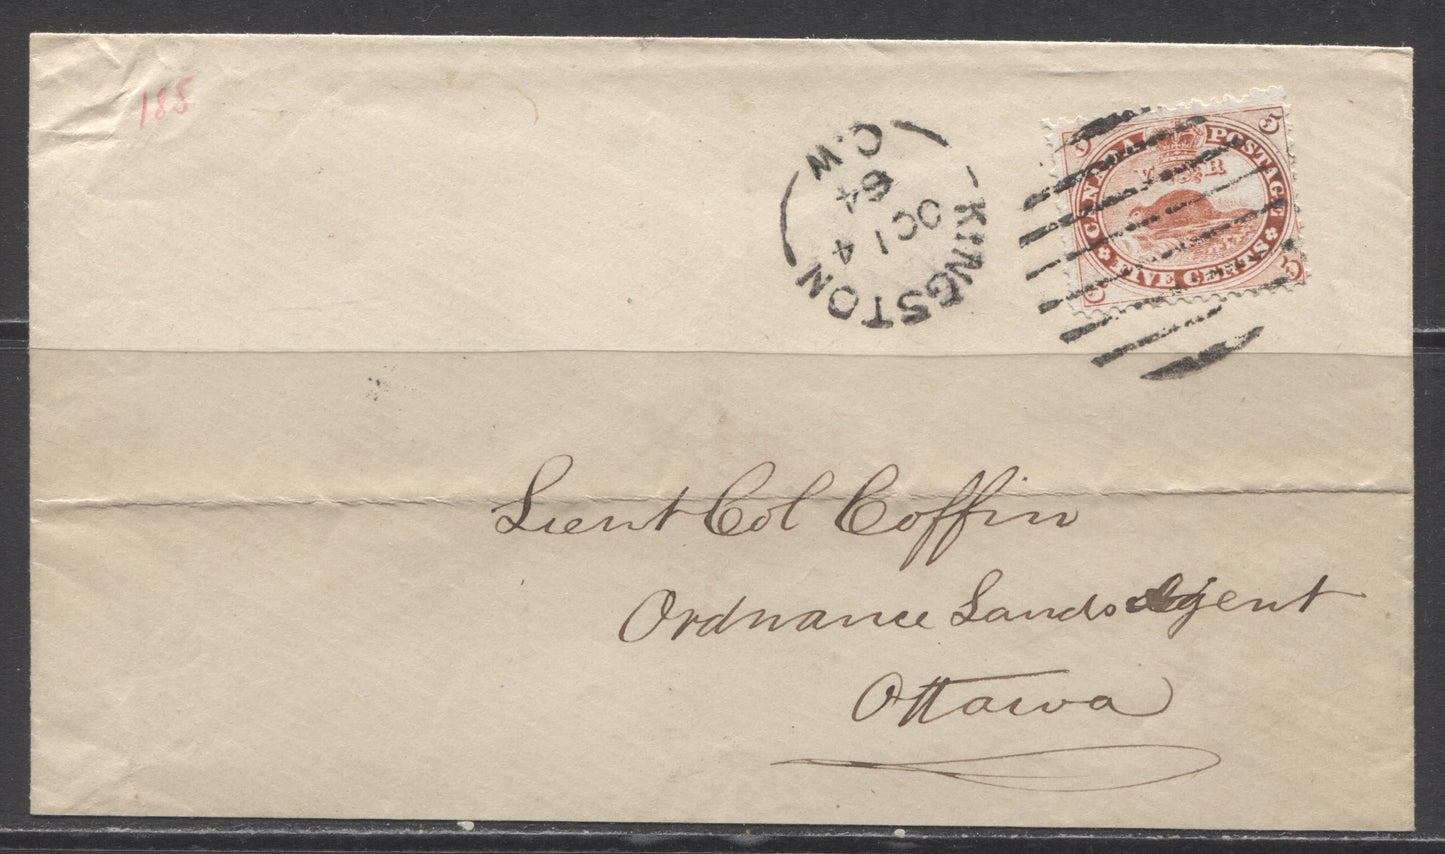 Lot 312 Canada #15ii 5c Orange Red, Beaver, 1859-1867 First Cents Issue, Single Usage of Perf. 11.75 x 12 on October 14, 1864 Cover to Ottawa, Beautiful Penmanship and Addressed to Lieutenant Colonel Coffin